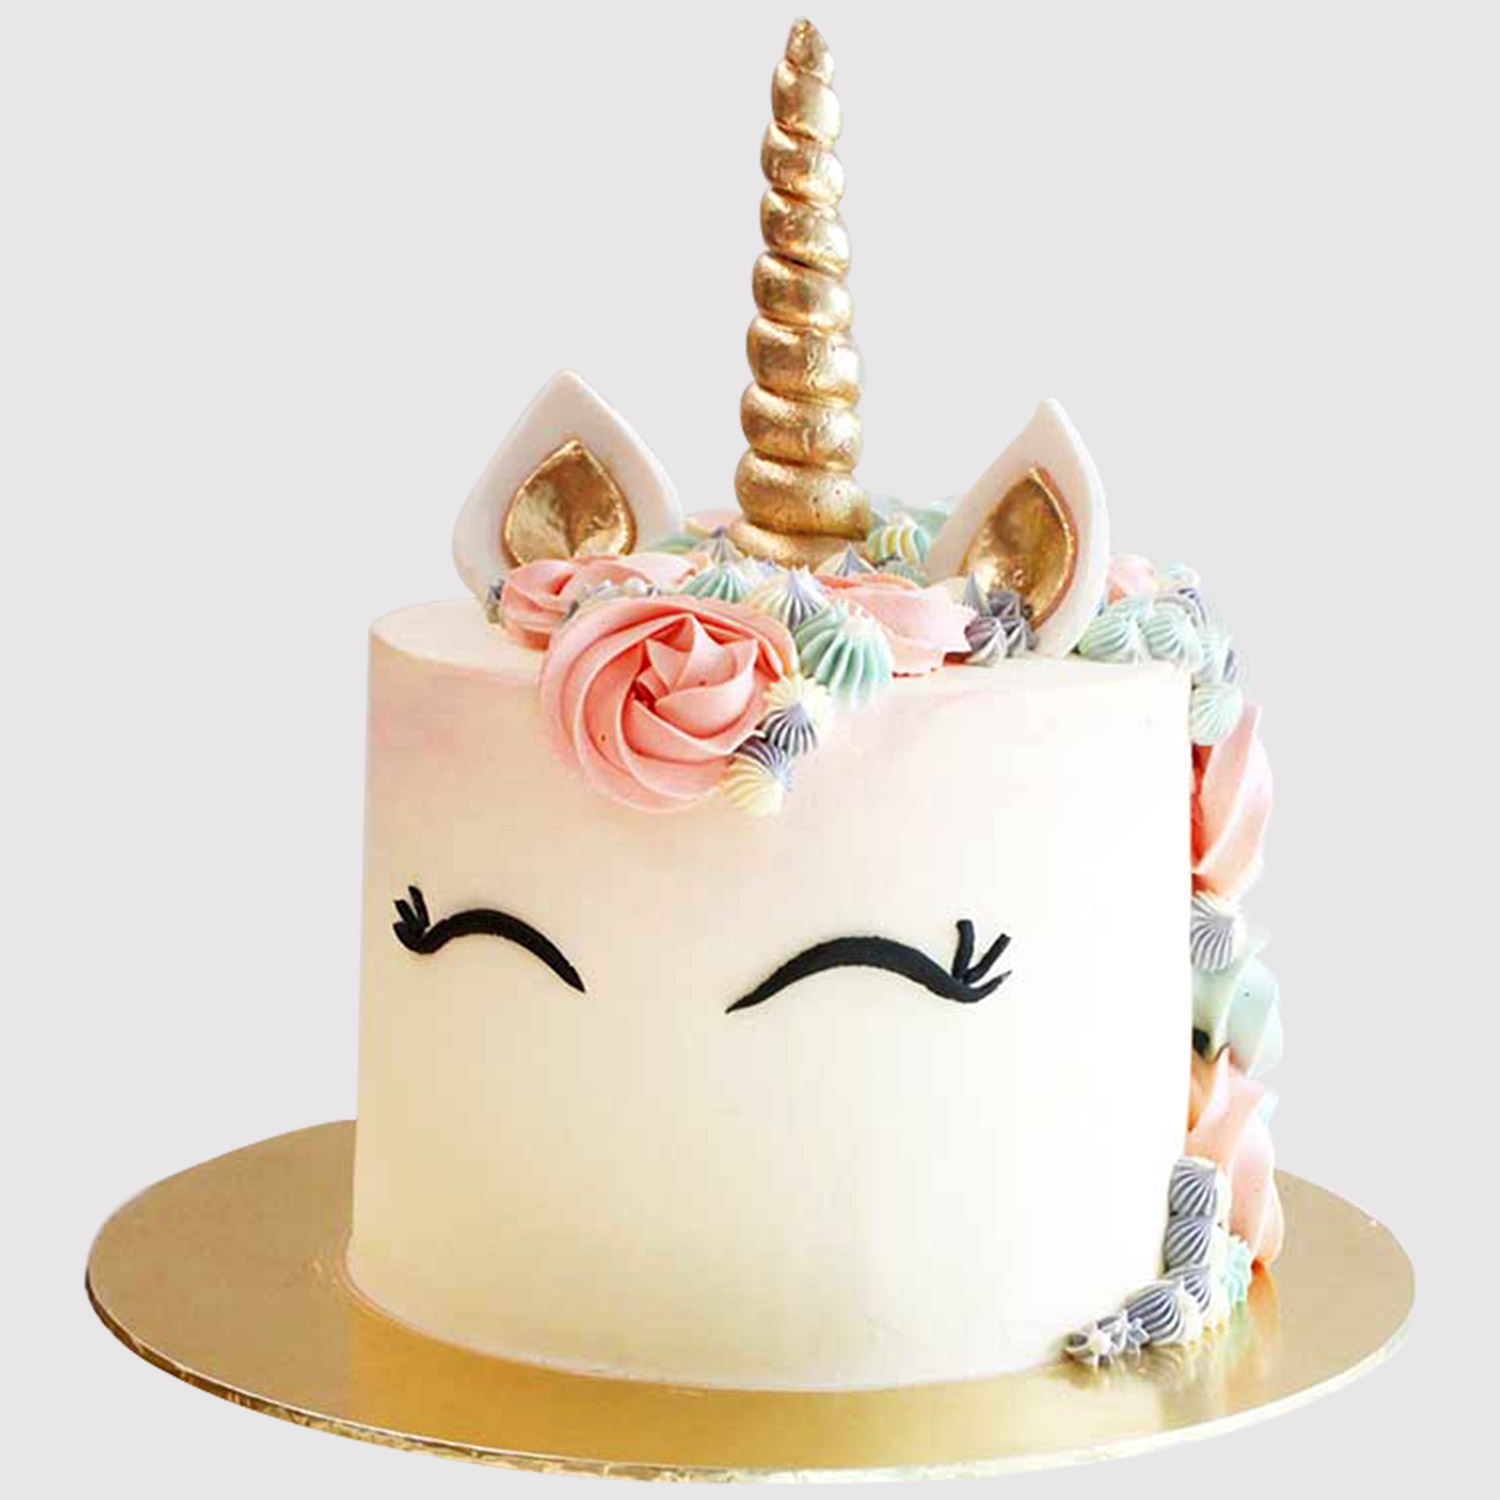 Online Pretty Unicorn Themed Vanilla Cake Gift Delivery in Singapore - FNP